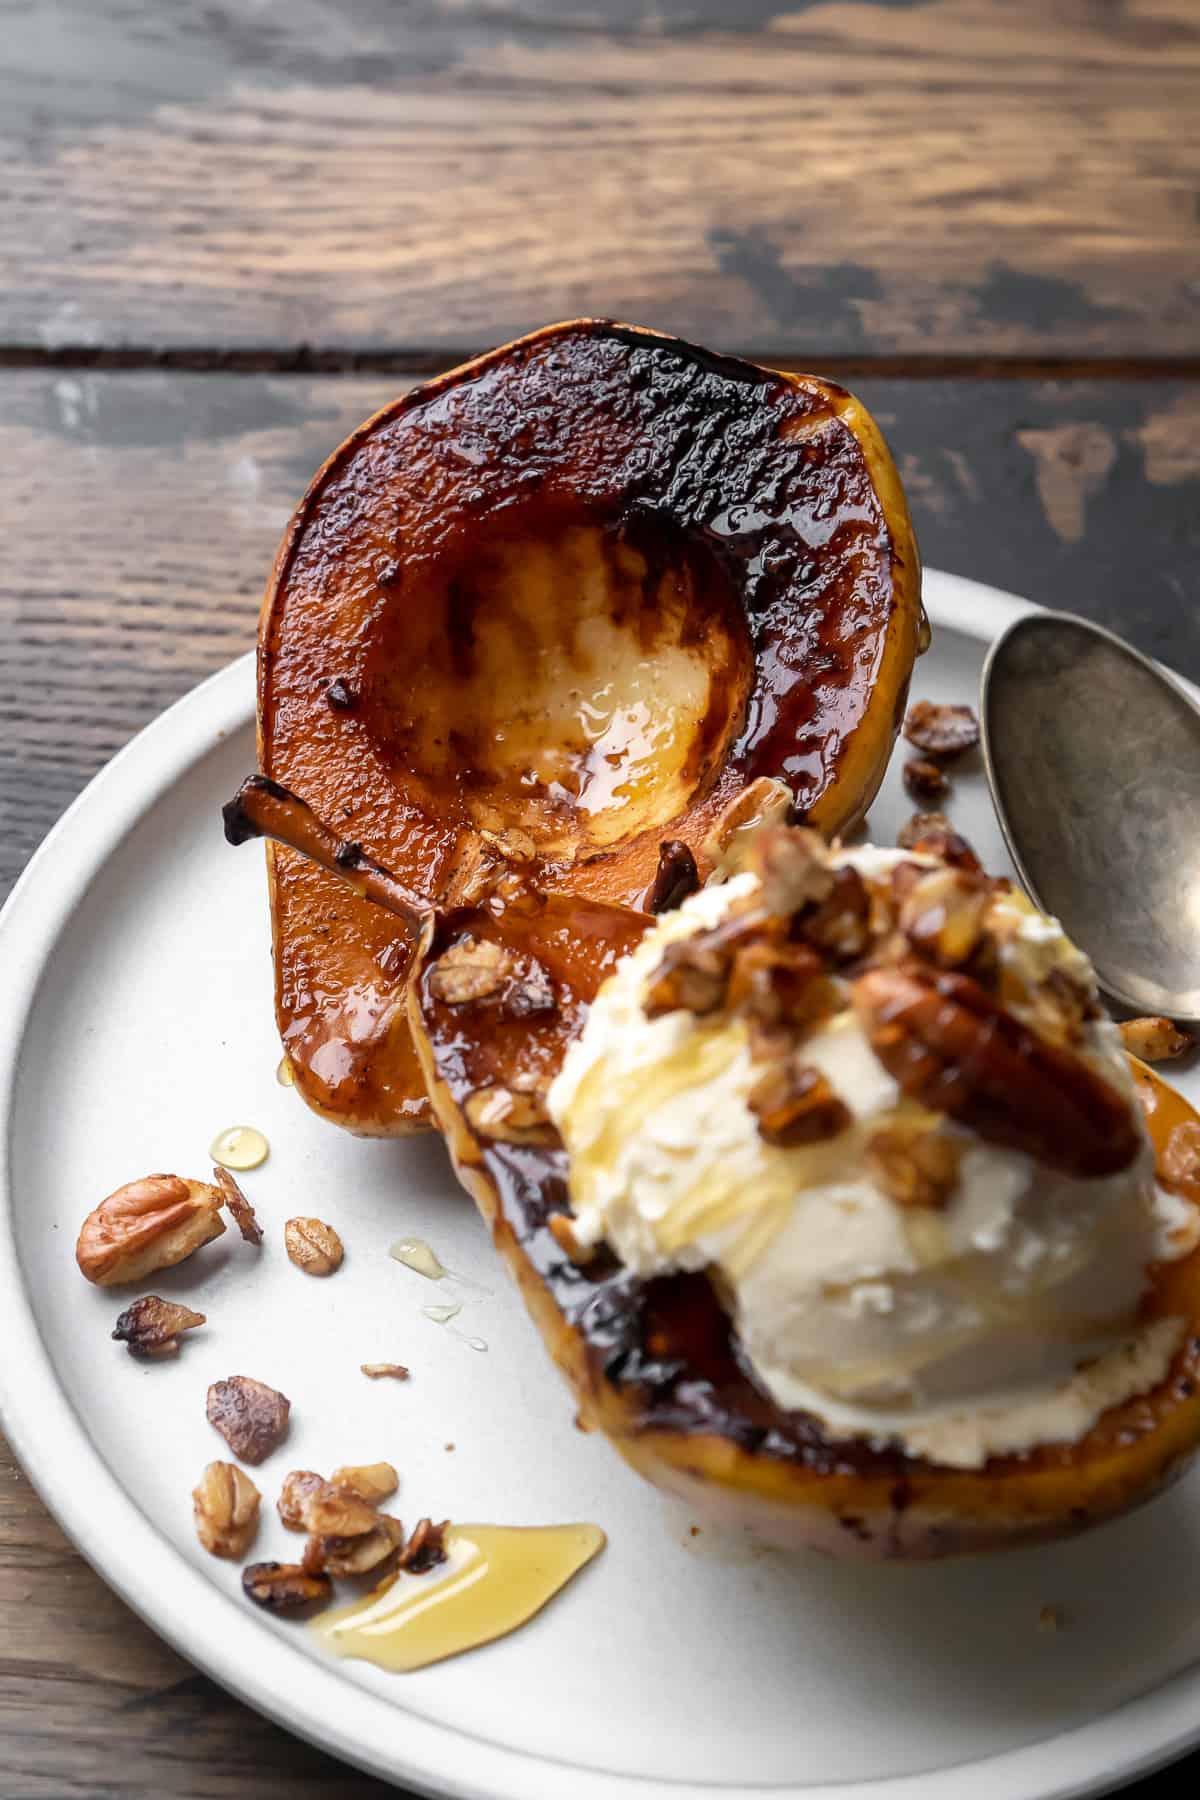 Caramelized pear with scoop of ice cream on top and oats.